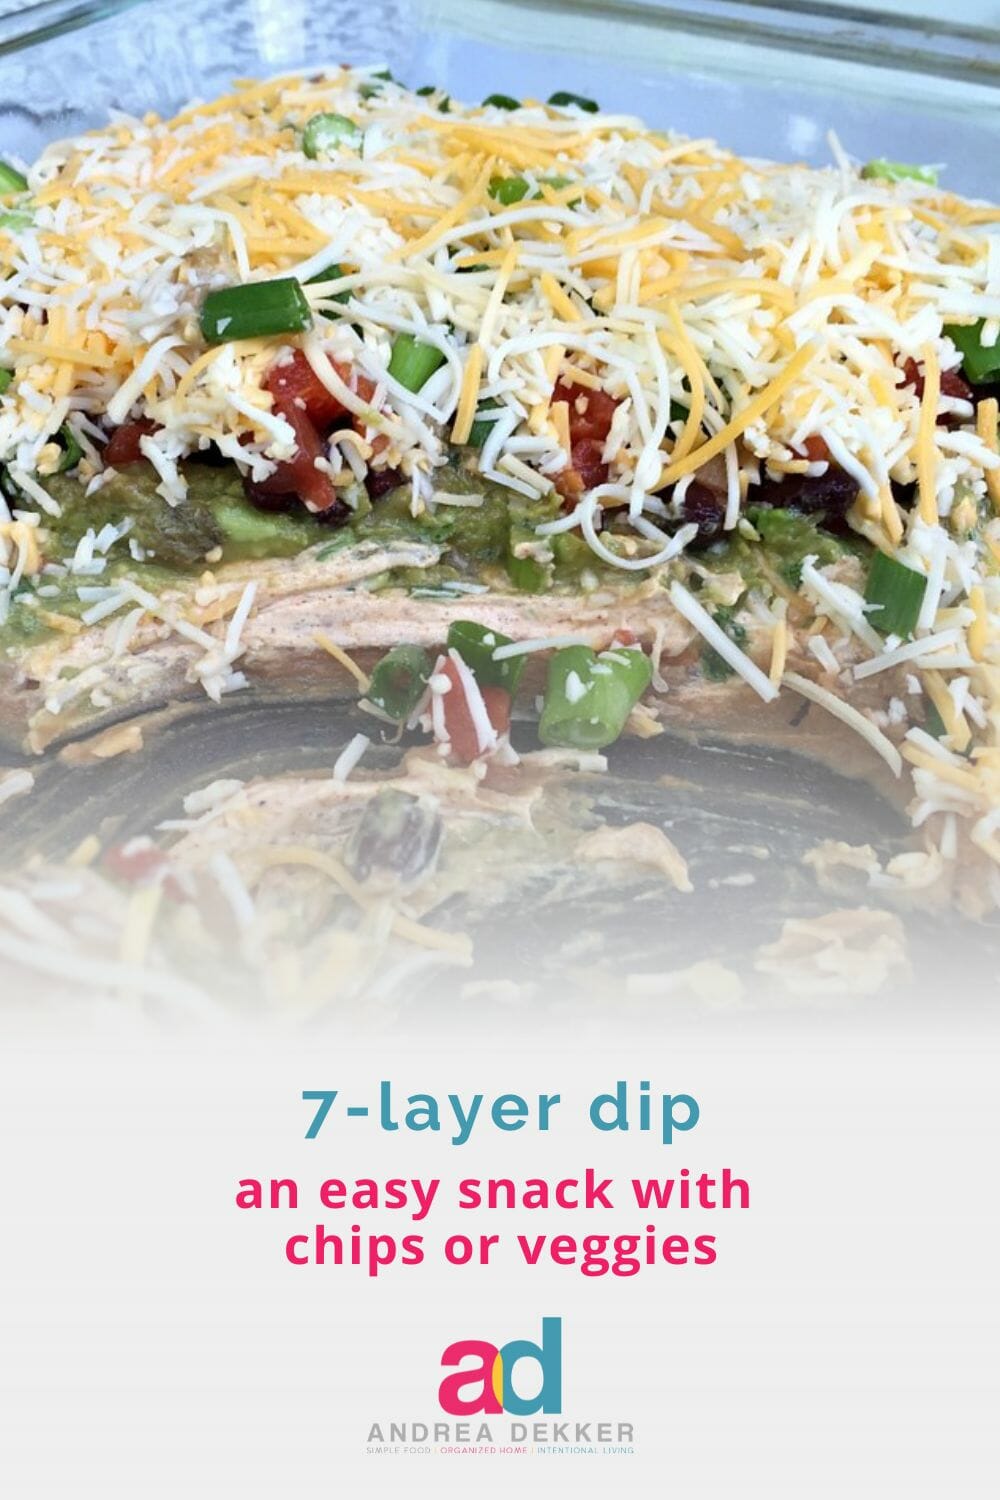 If you're looking for a ridiculously easy, make-ahead snack or side dish for an upcoming summer gathering, this layer dip should do the trick! via @andreadekker